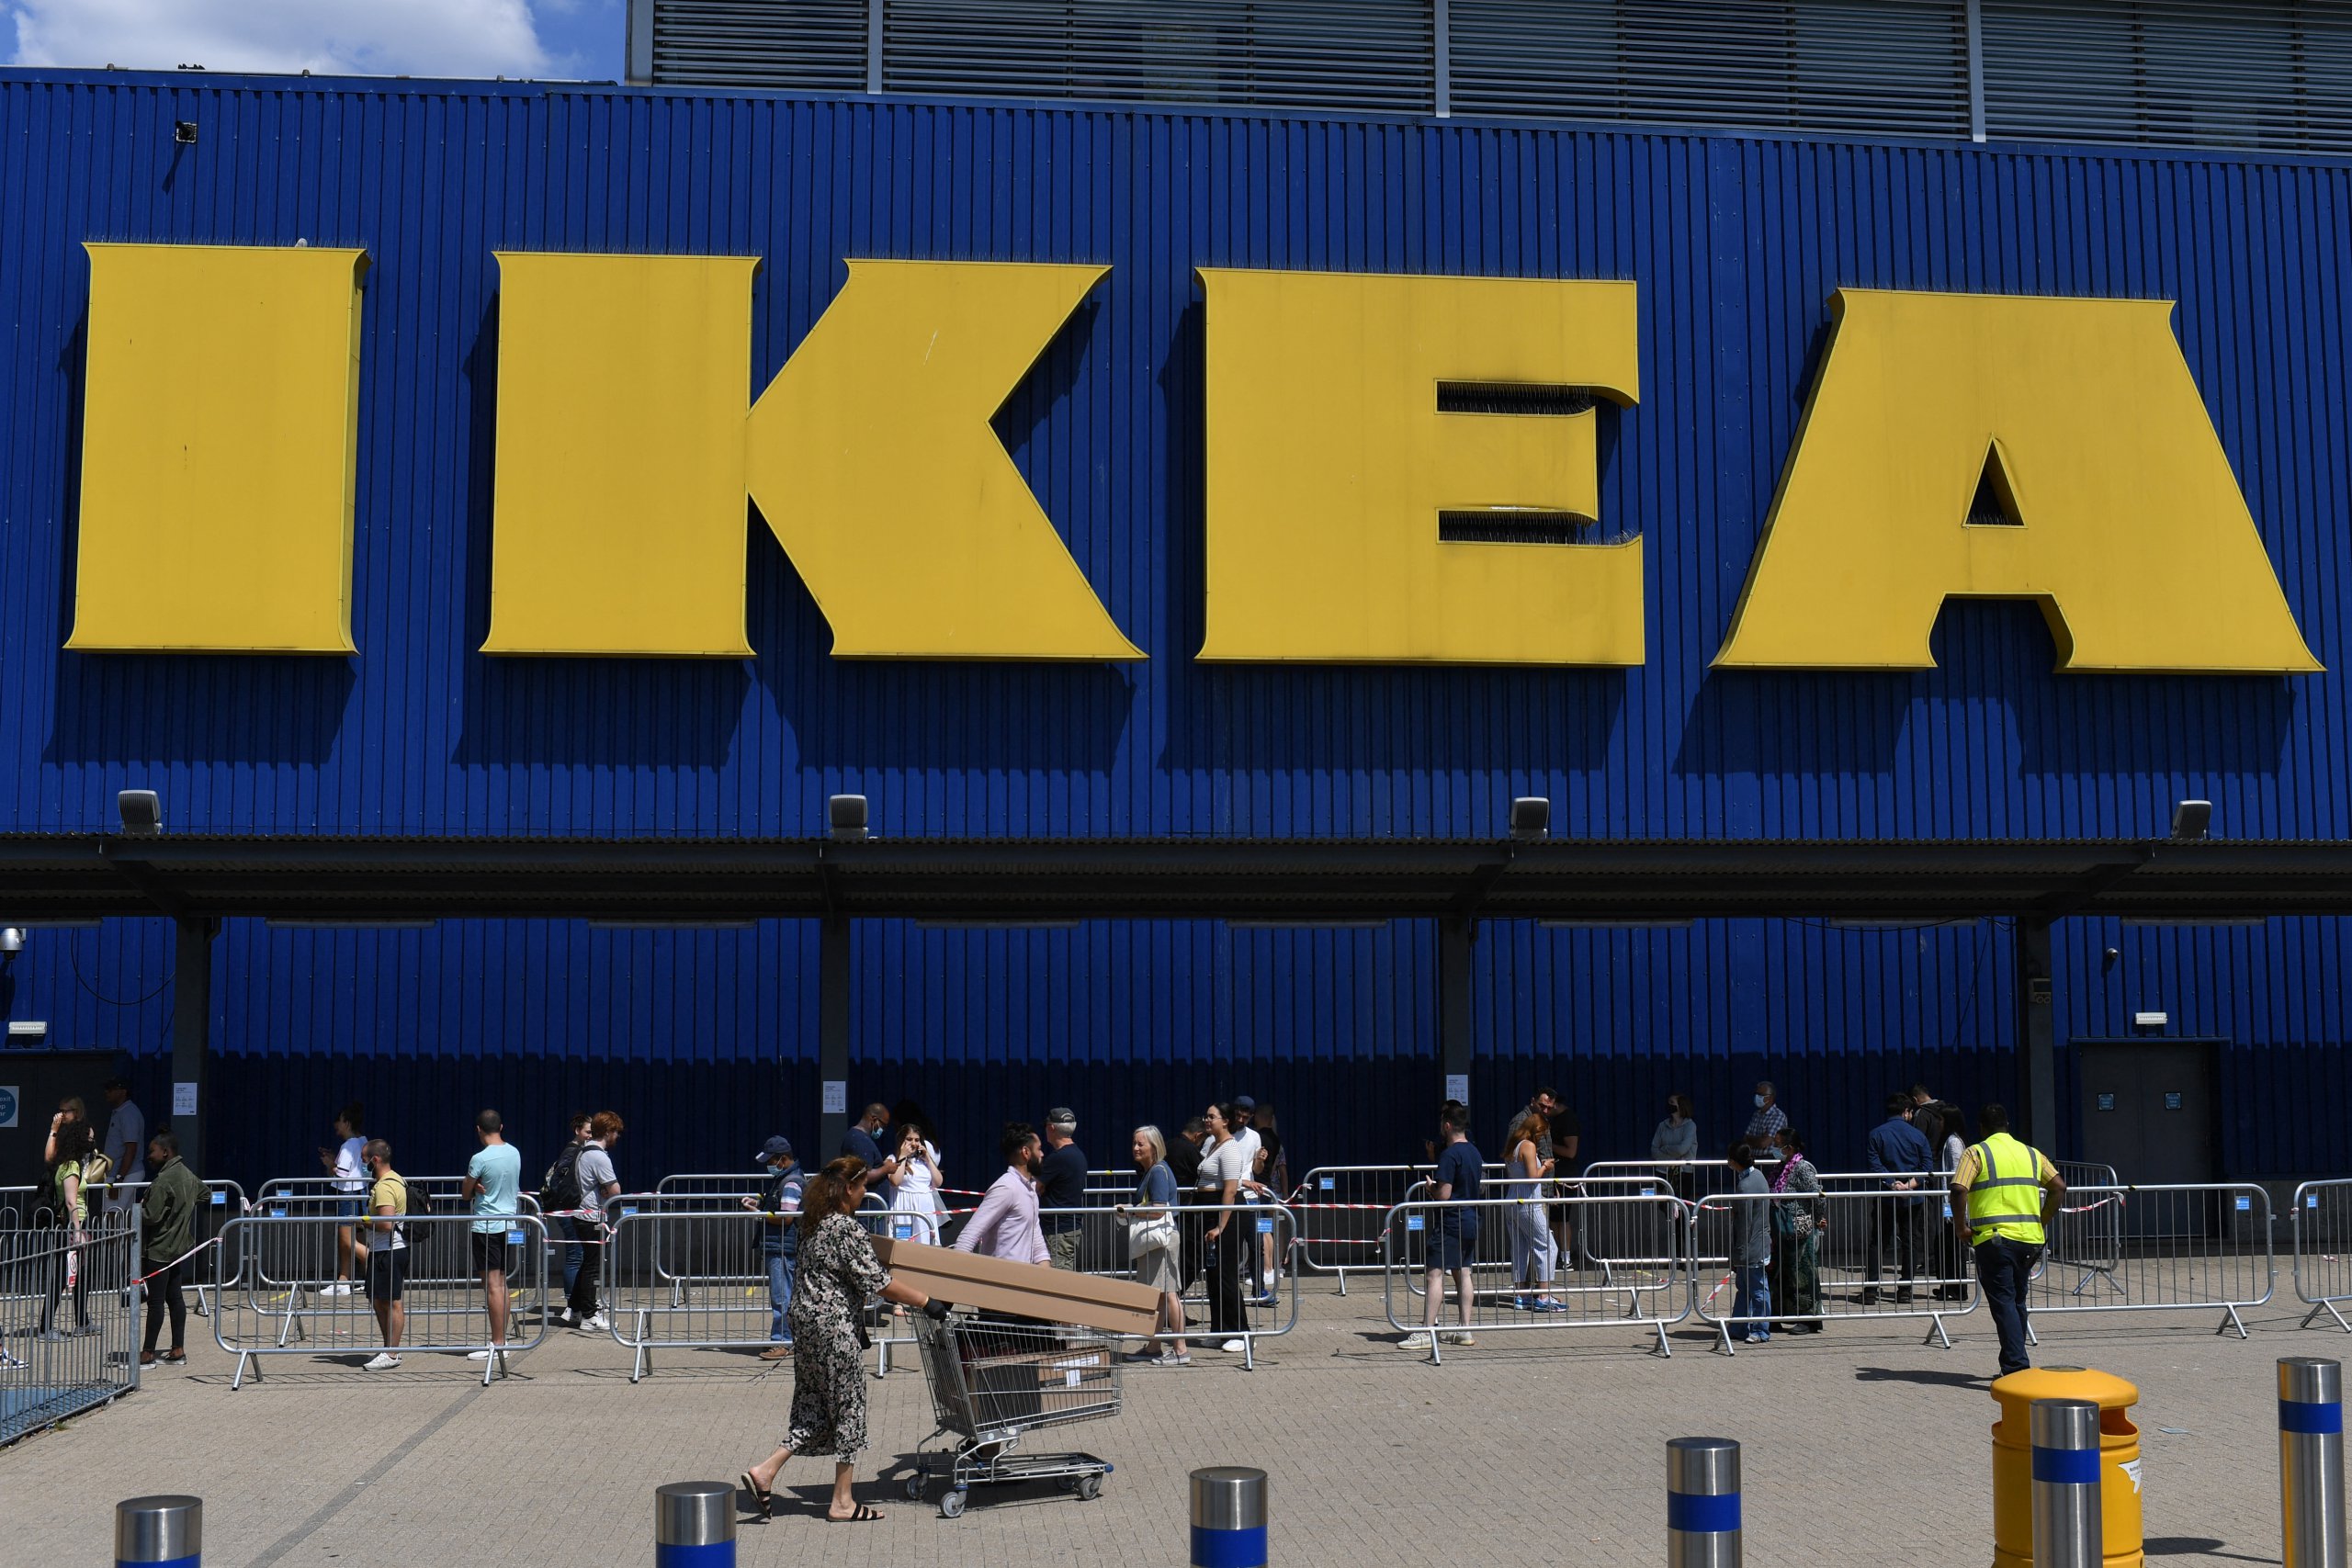 Ikea retail operations manager stressed that physical stores were being revamped to support online purchases